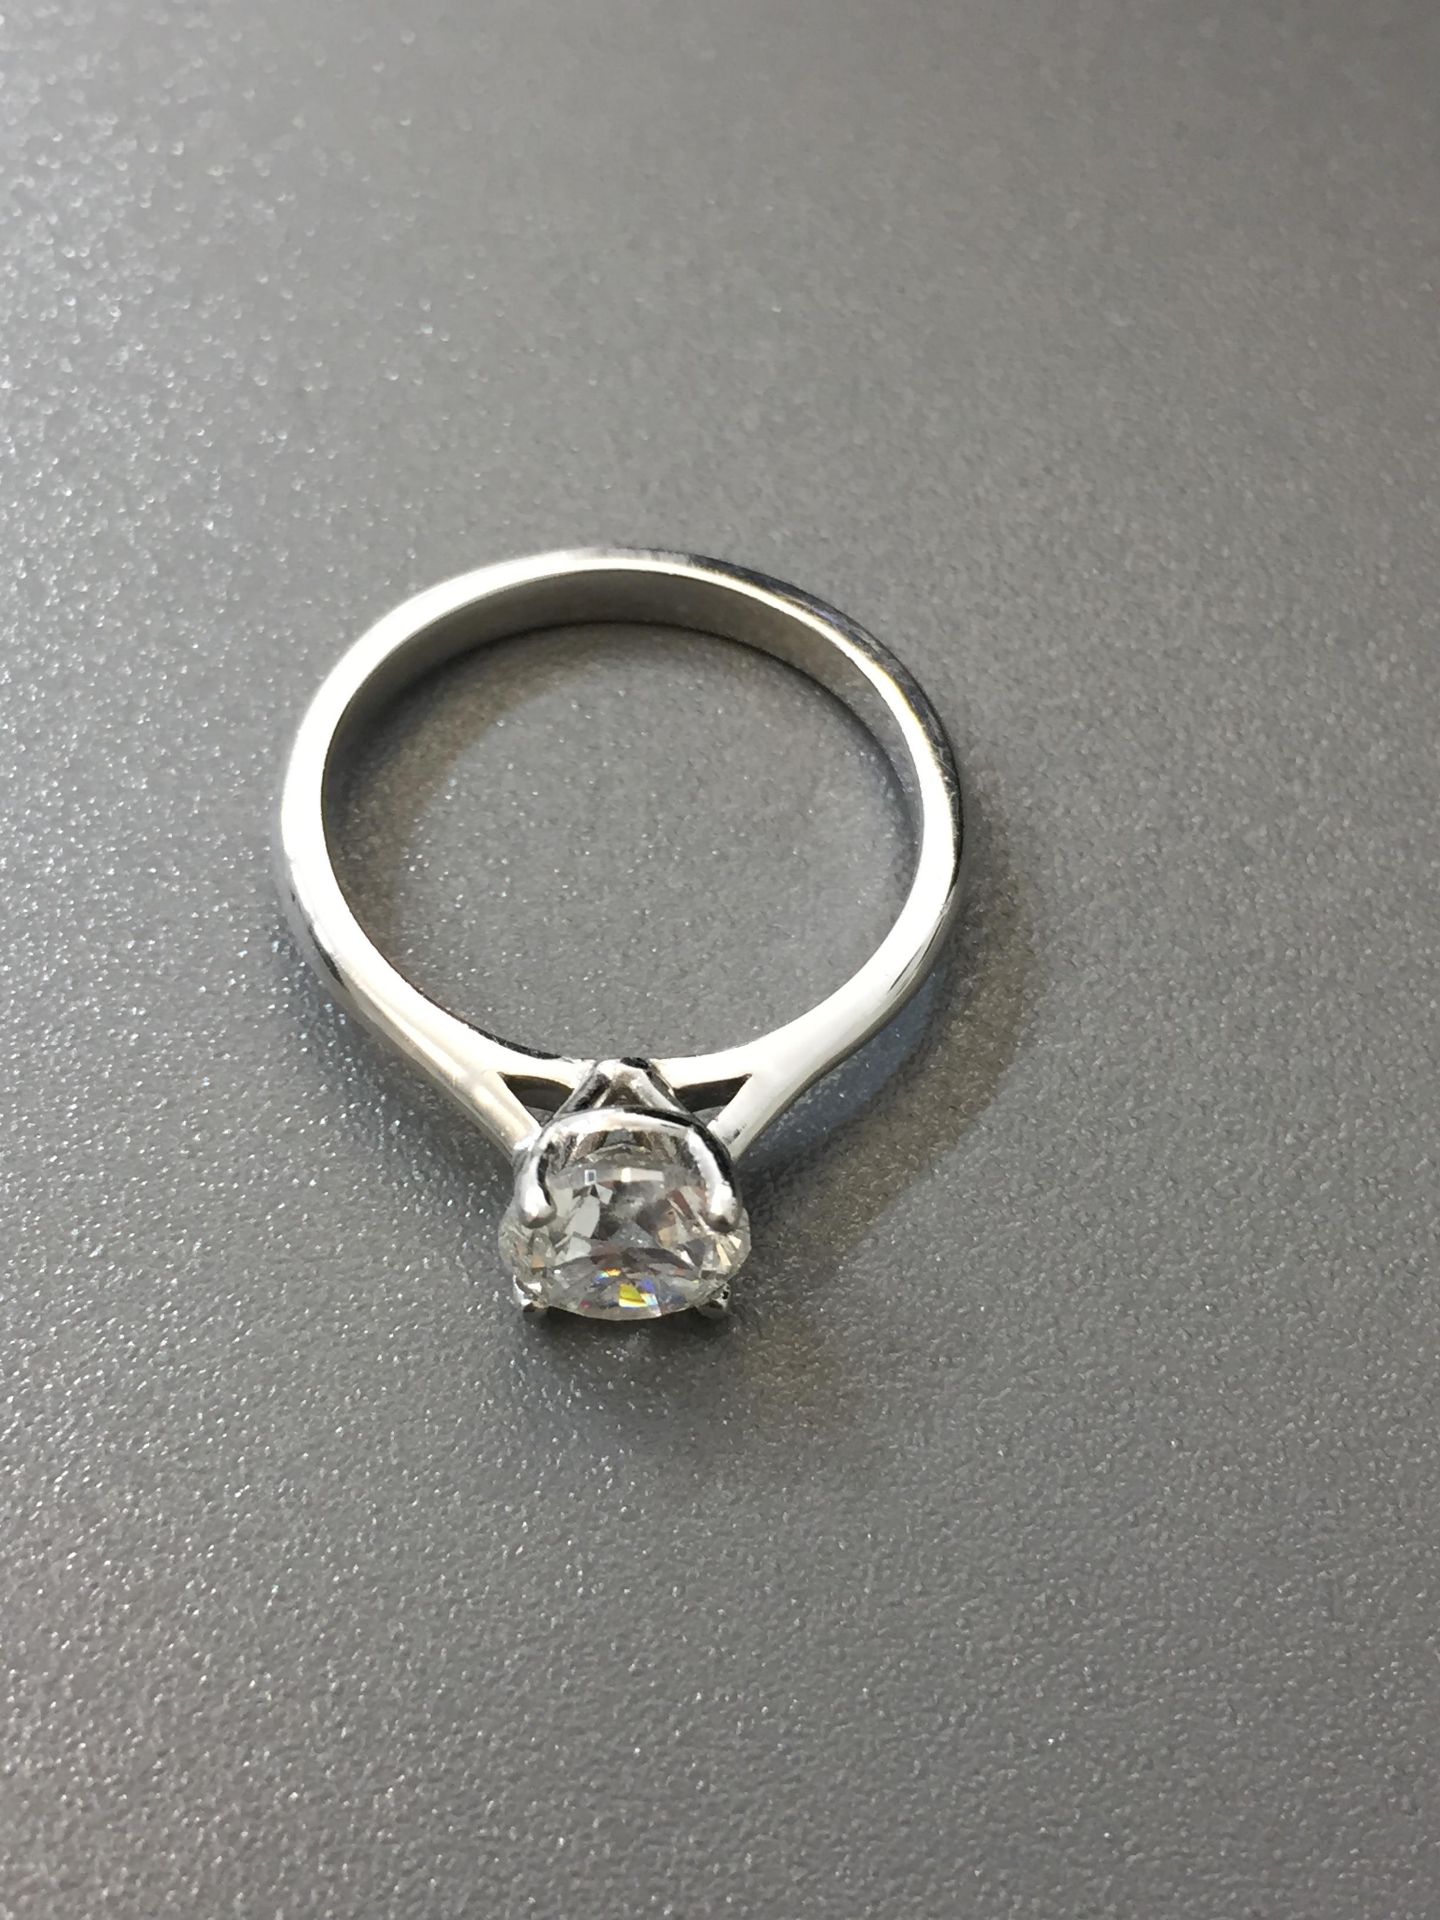 1.01ct diamond solitaire ring set in 18ct white gold.G colour diamond Internally flawless natural - Image 2 of 3